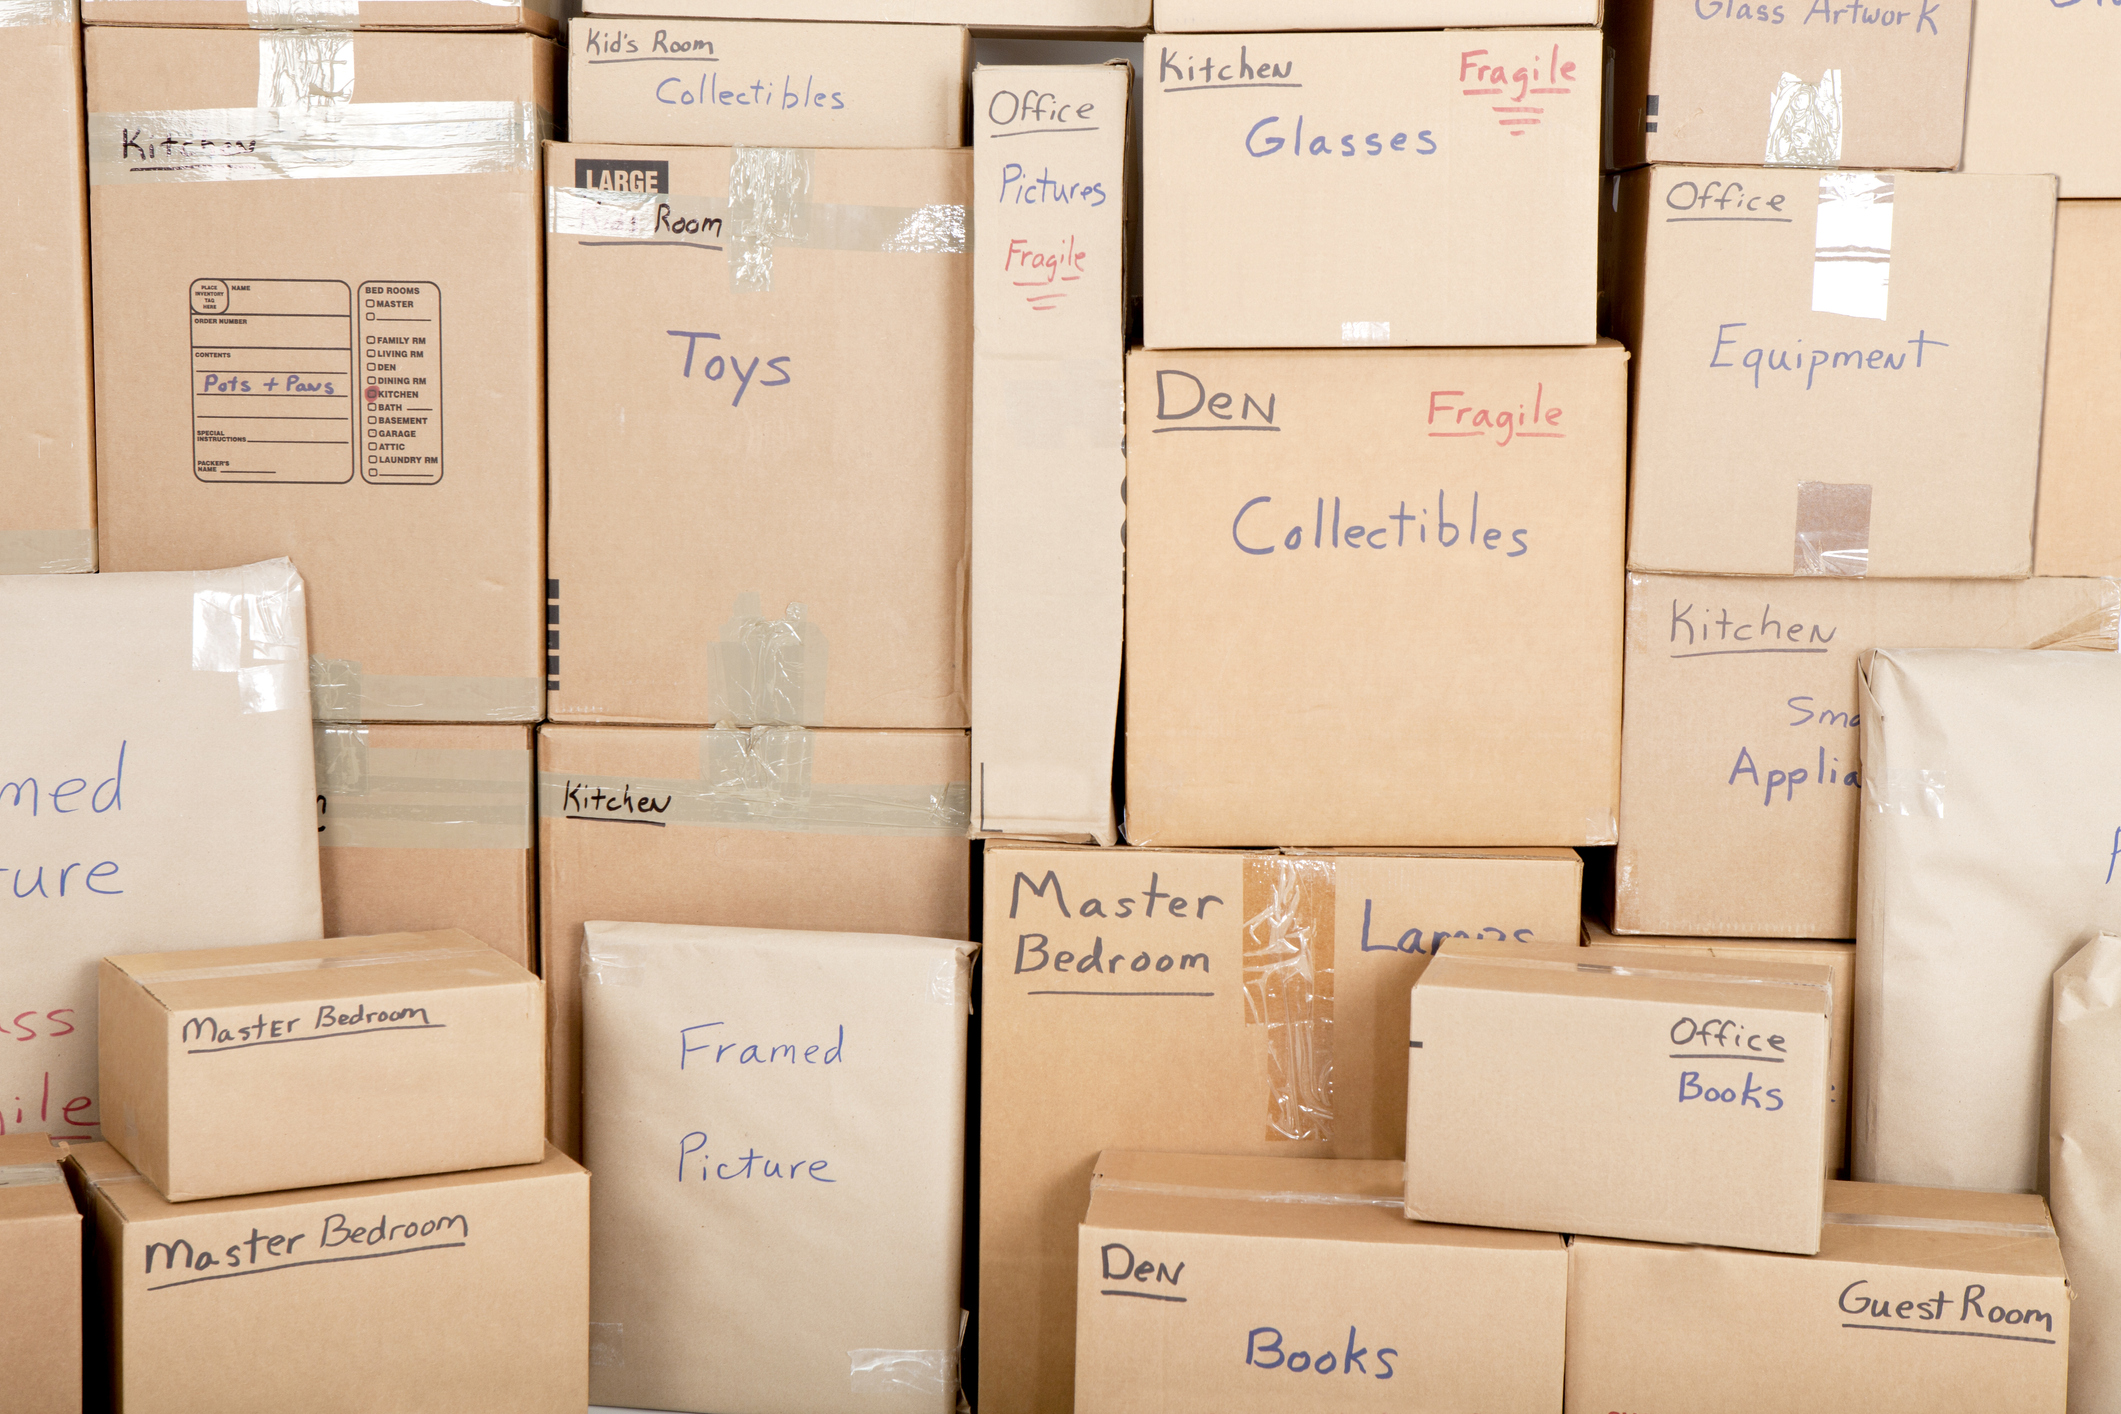 6 SIMPLE DIY ORGANIZERS FOR STORAGE FROM CARDBOARD BOXES